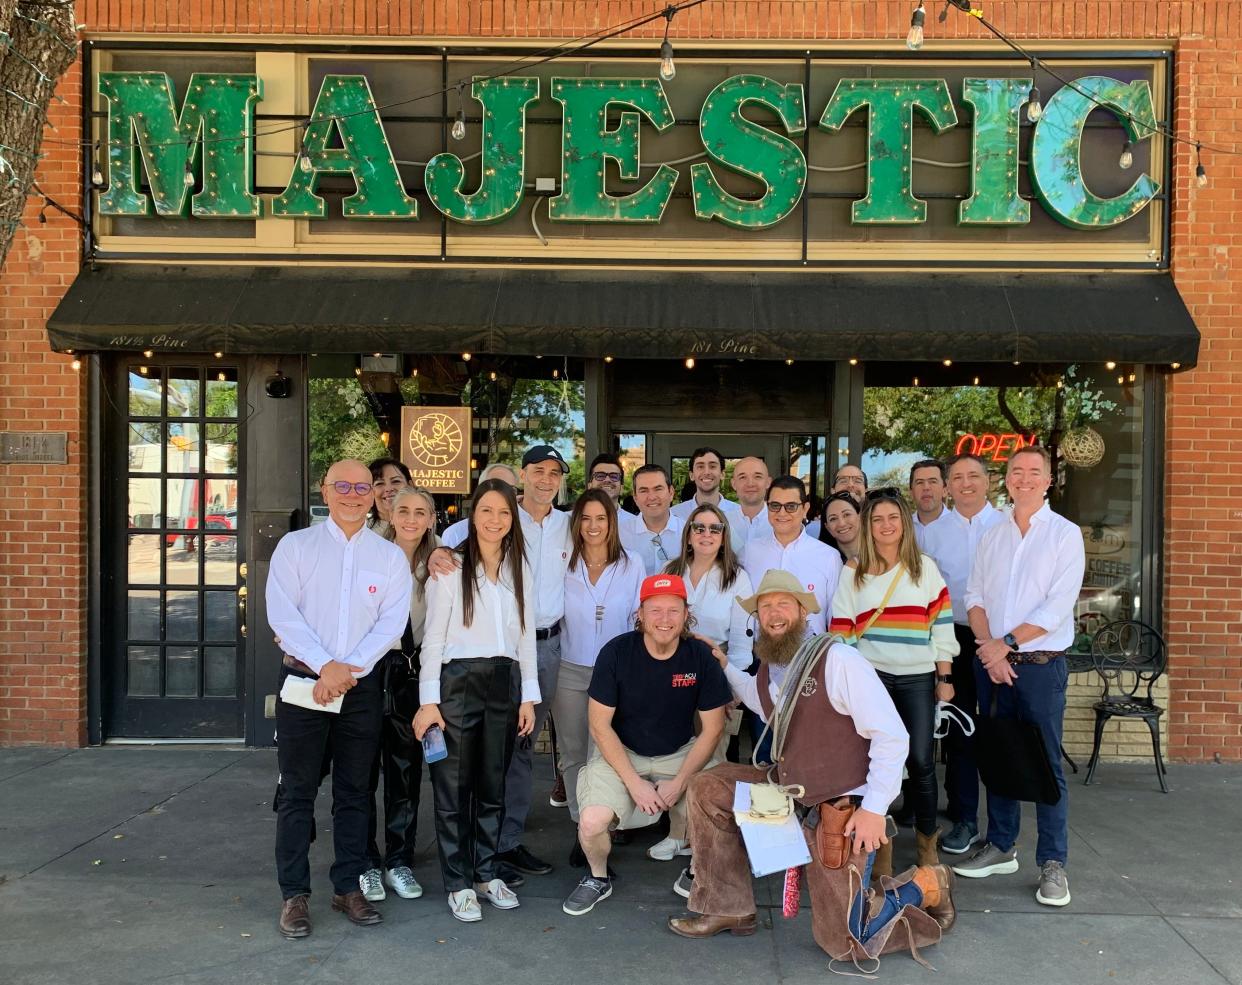 A Downtown Abilene Walking Tour group snaps a photo outside the Majestic coffee shop on Pine Street with their cowboy poet tour guide 'Gus McDusty.'